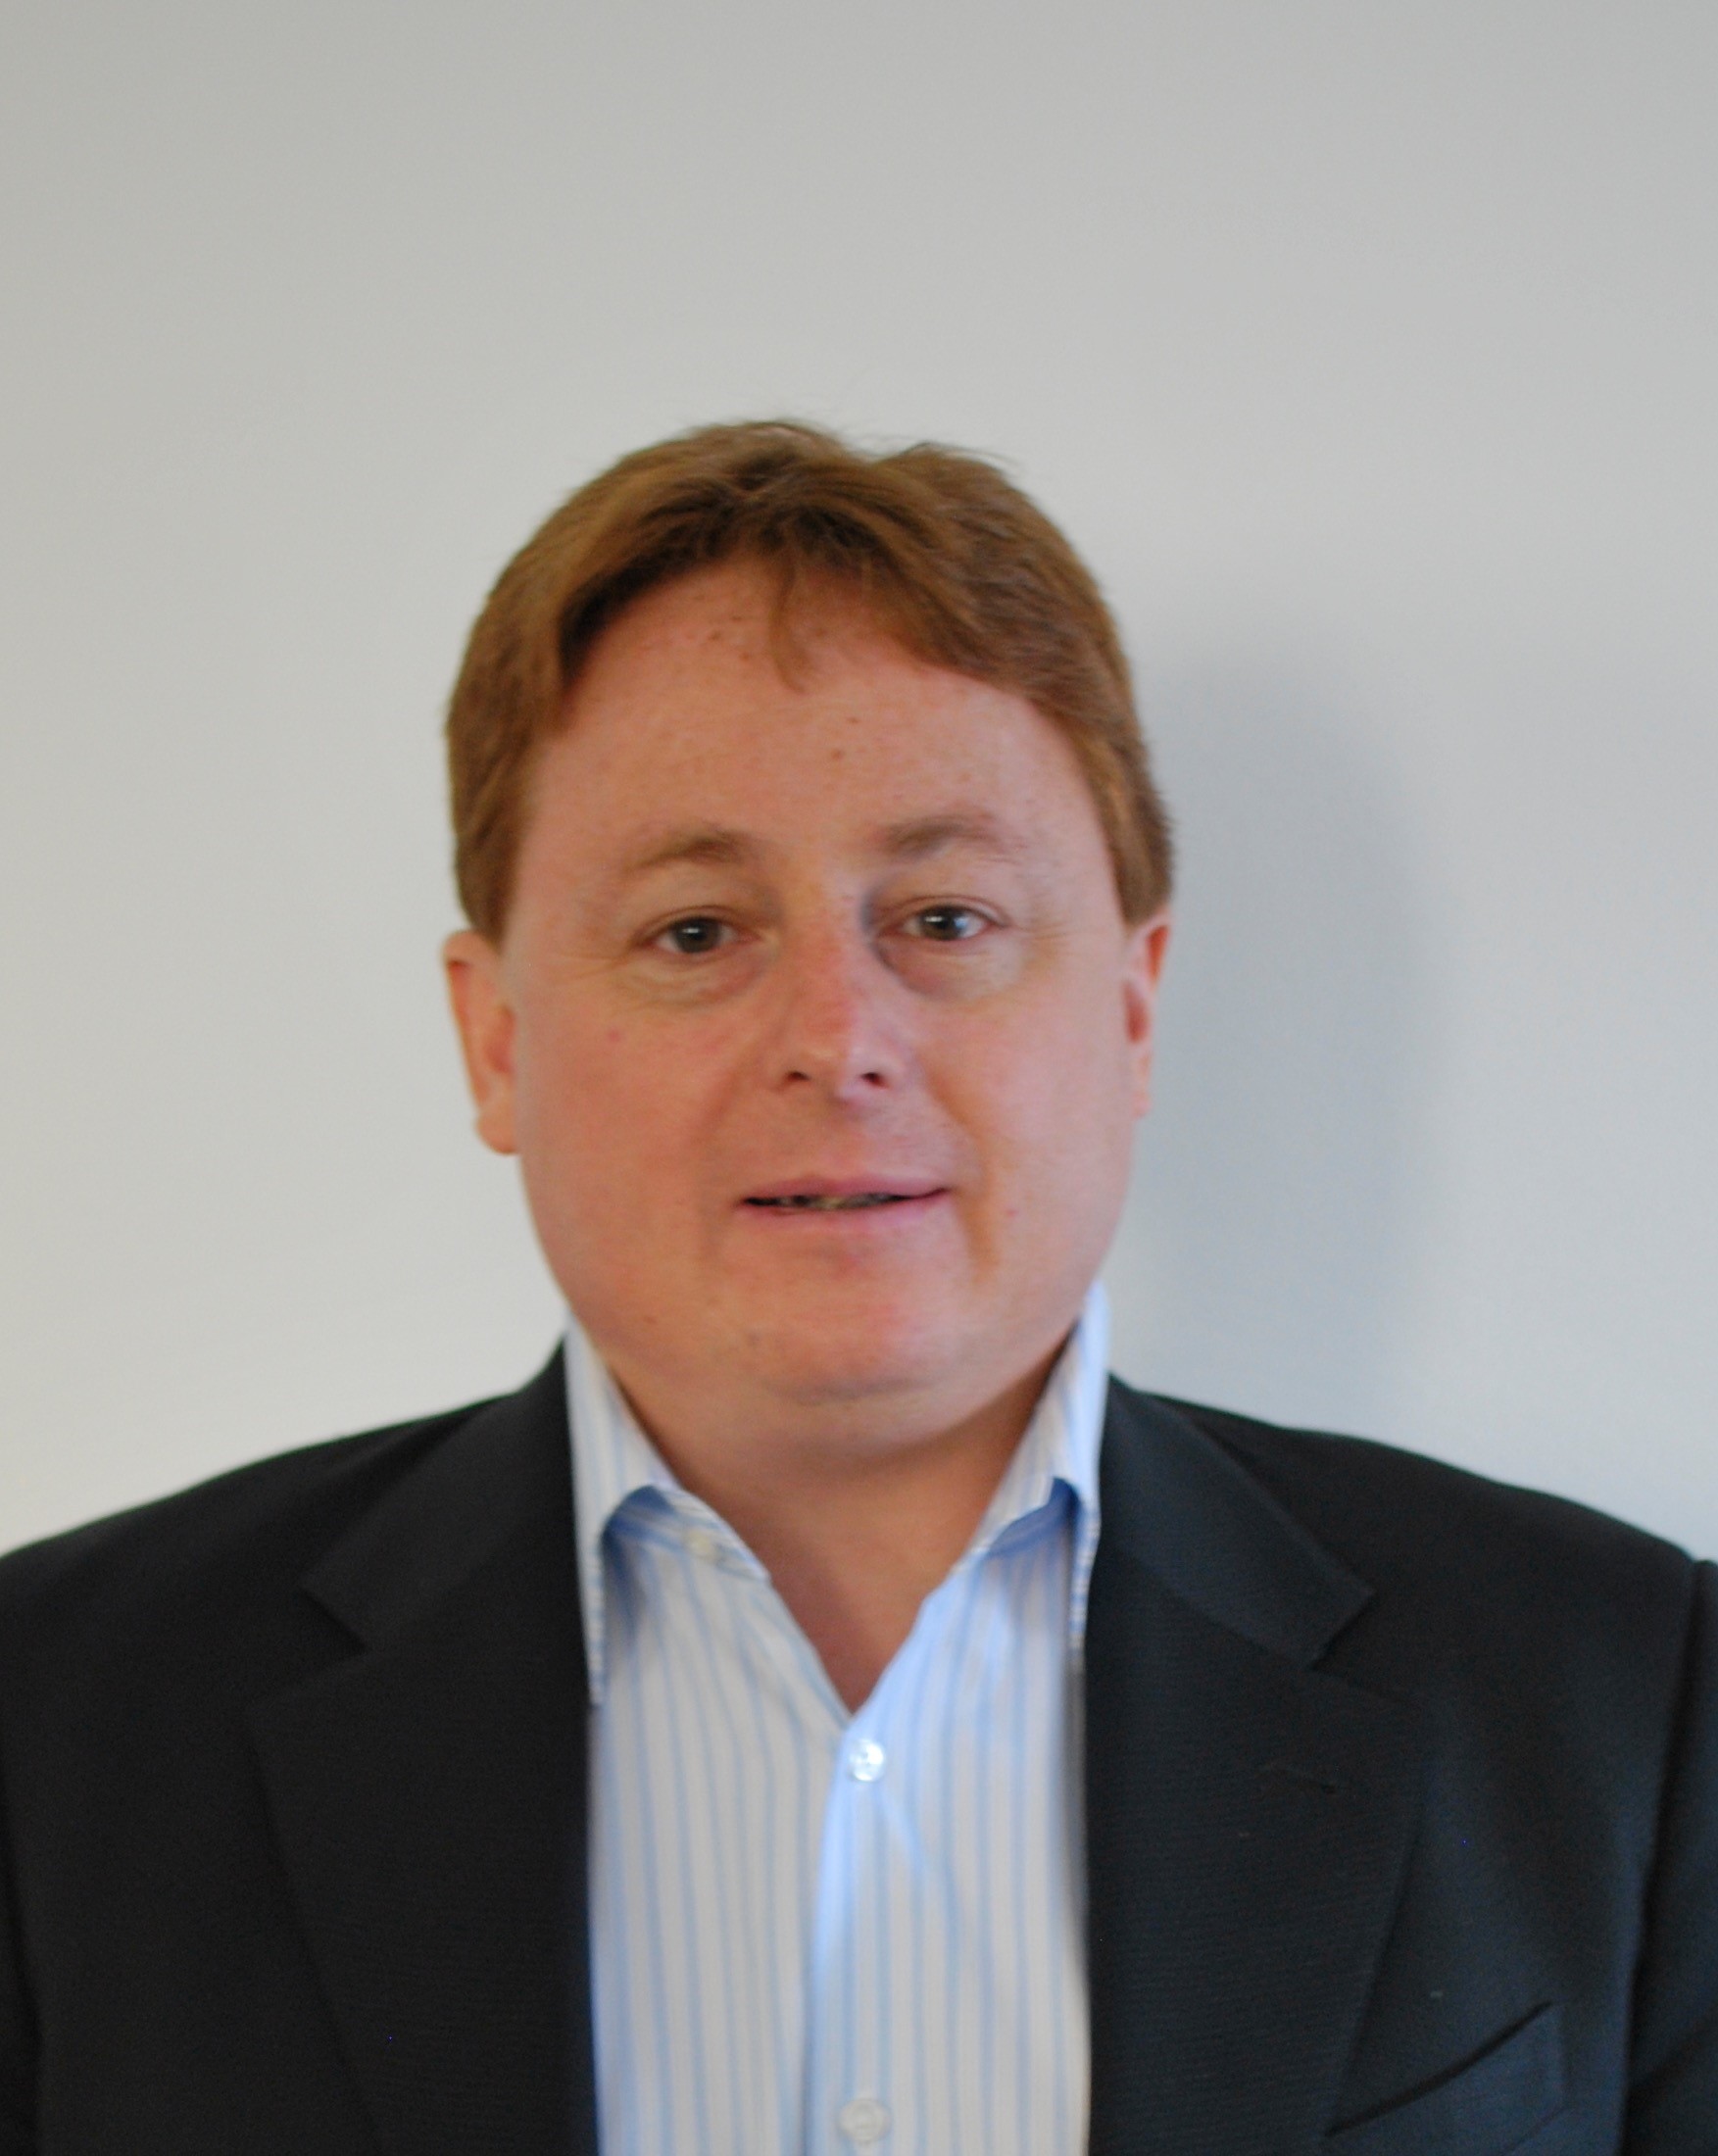 David Quail joins as the Terex MPS market area director